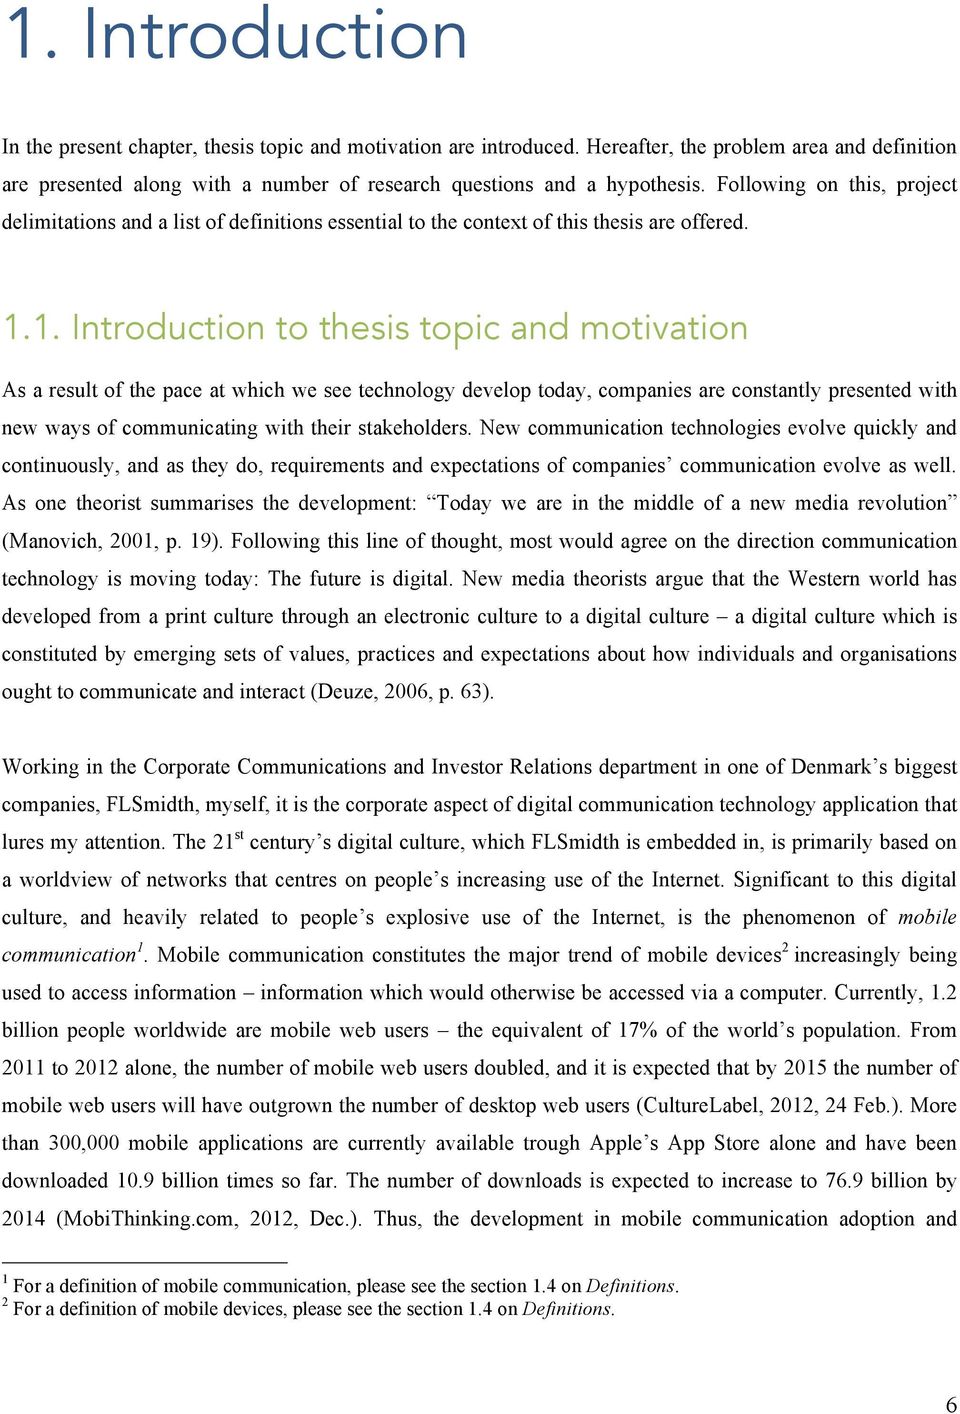 1. Introduction to thesis topic and motivation As a result of the pace at which we see technology develop today, companies are constantly presented with new ways of communicating with their